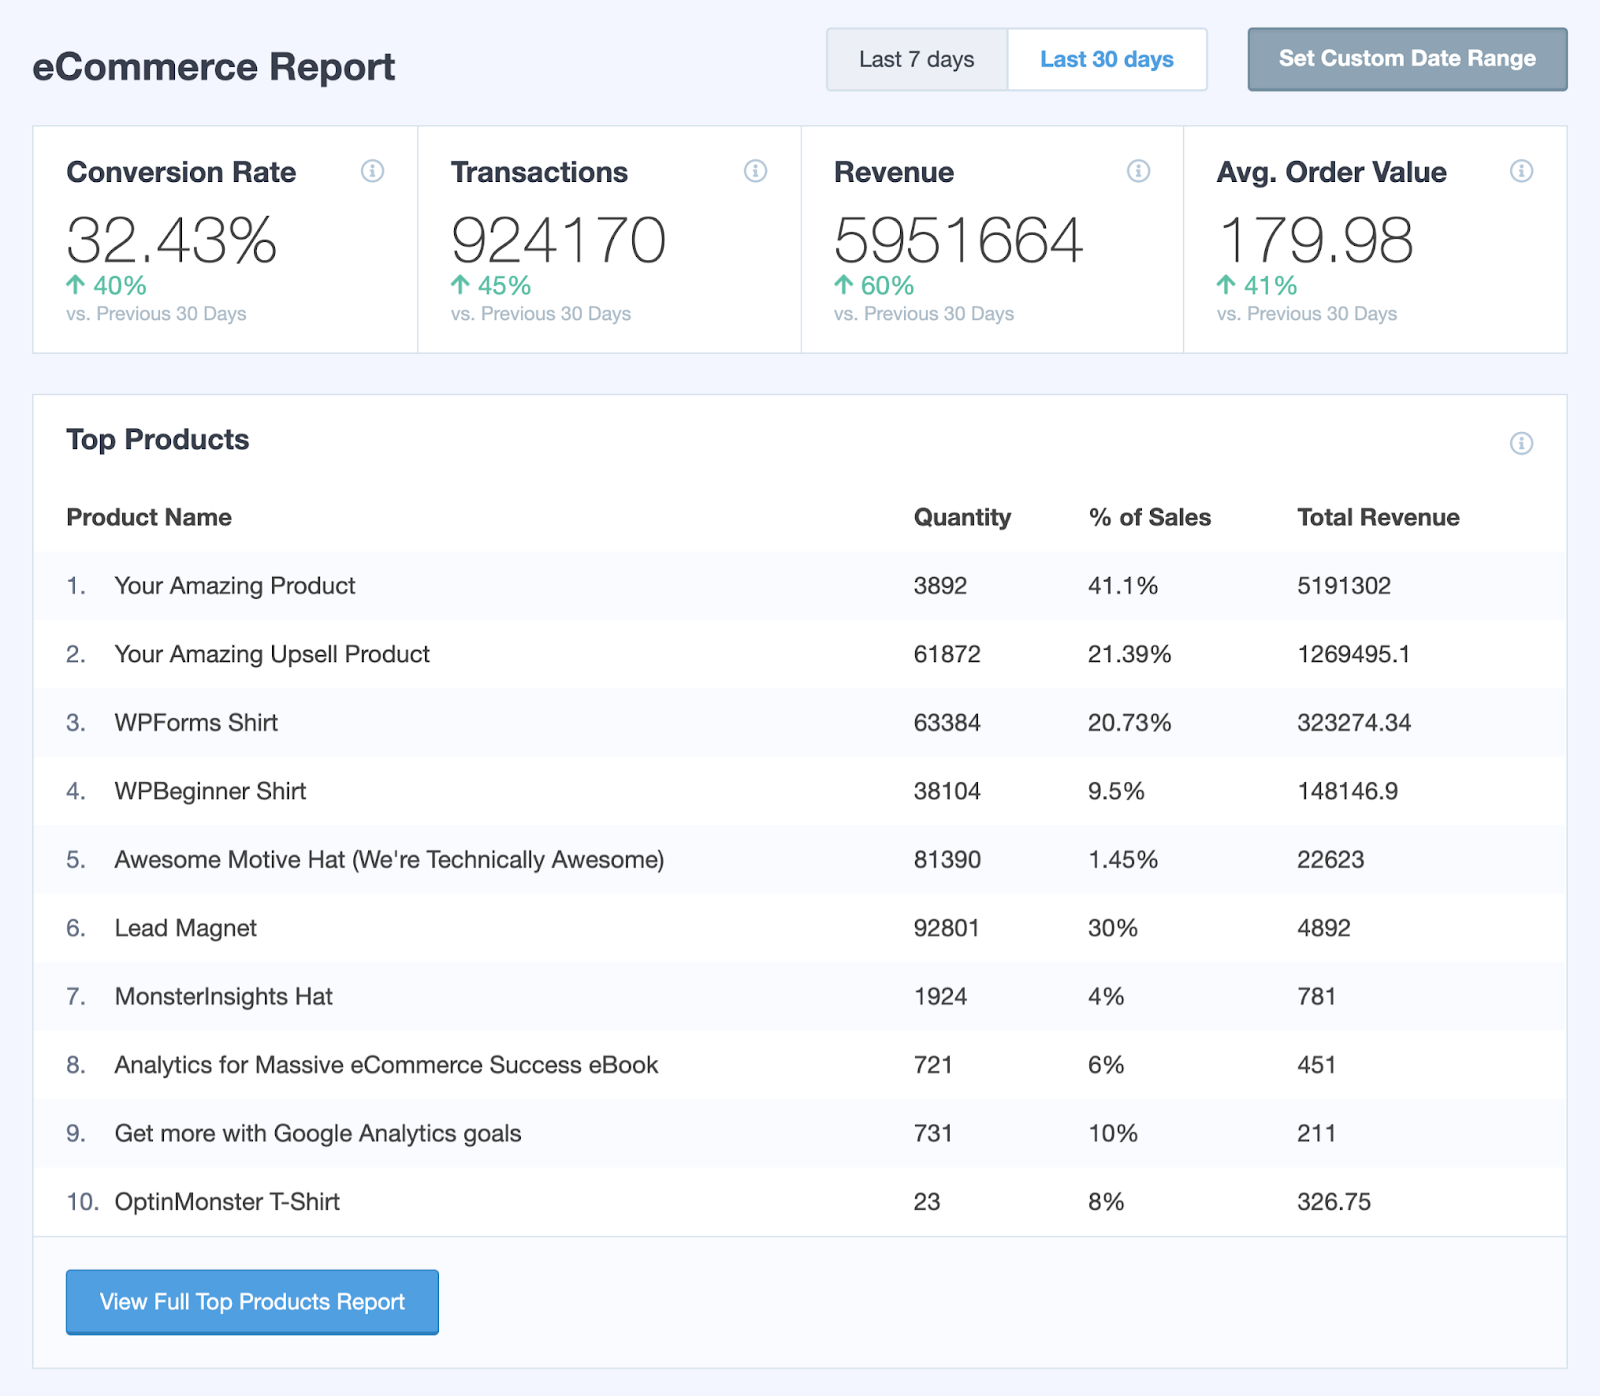 Wordpress tracker plugin, MonsterInsights Ecommerce Report: The image displays the Ecommerce Report feature of MonsterInsights, the top Google Analytics plugin for WordPress with over 3 million active installs. Monitor and analyze your ecommerce data with ease right in your WordPress dashboard. Grow your online business successfully by making smart choices based on informed decisions.